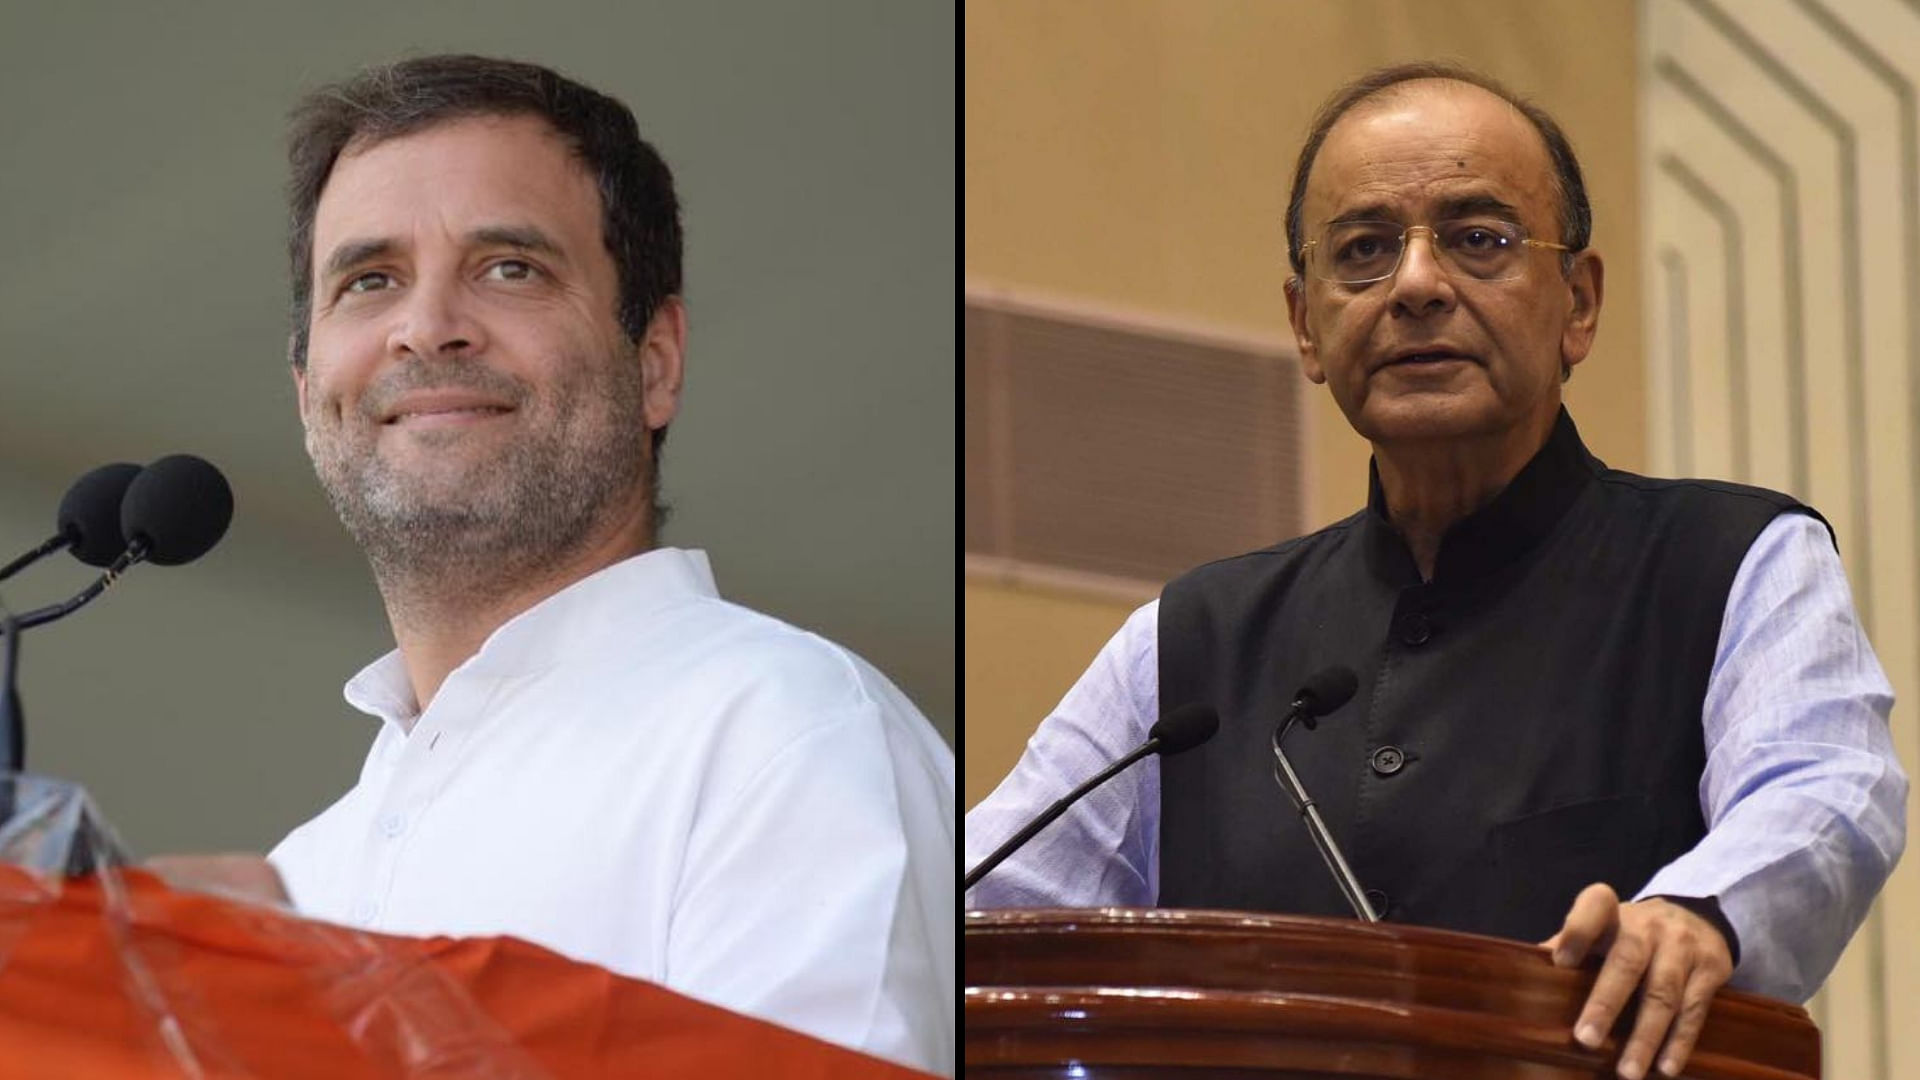 Both Rahul Gandhi and Arun Jaitley condemned the attack on Kashmiri’s in Lucknow.